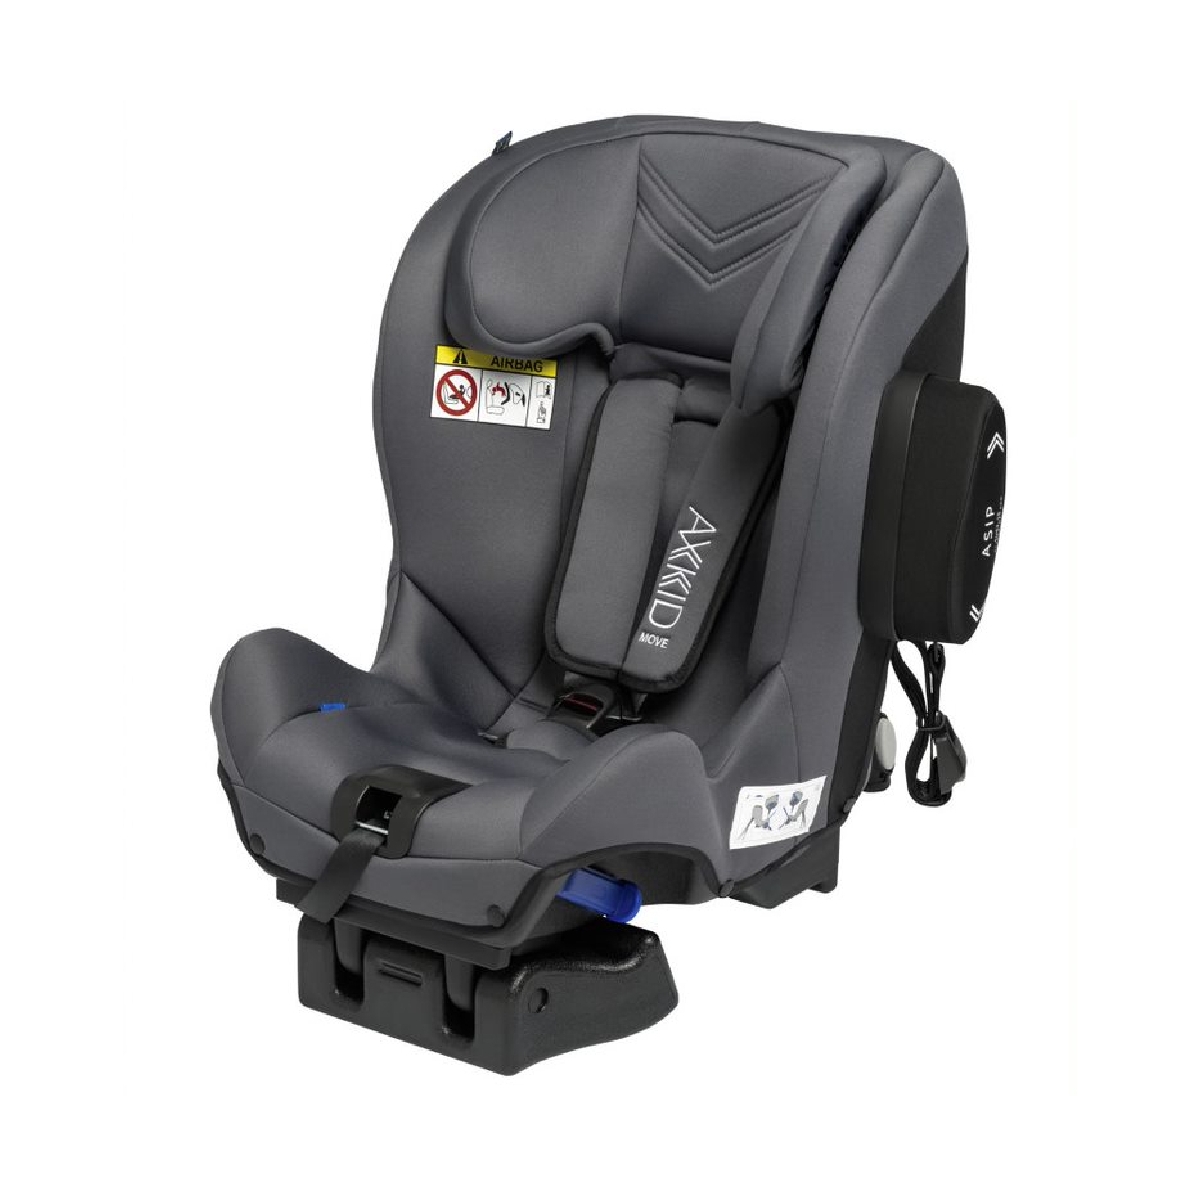 Axkid Move Group 1,2 Car Seat